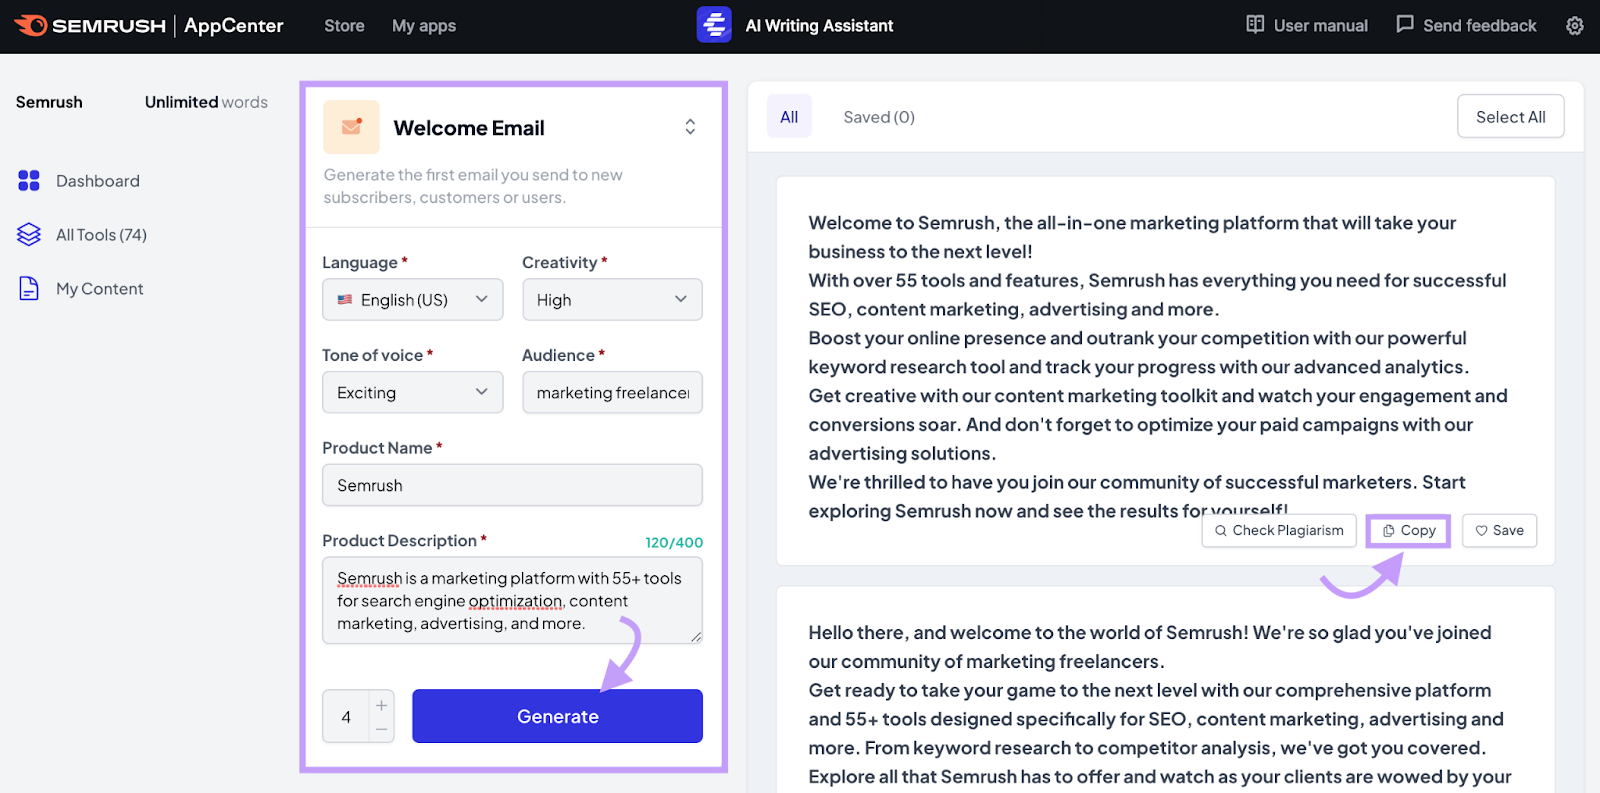 Welcome email creation screen within the AI Writing Assistant